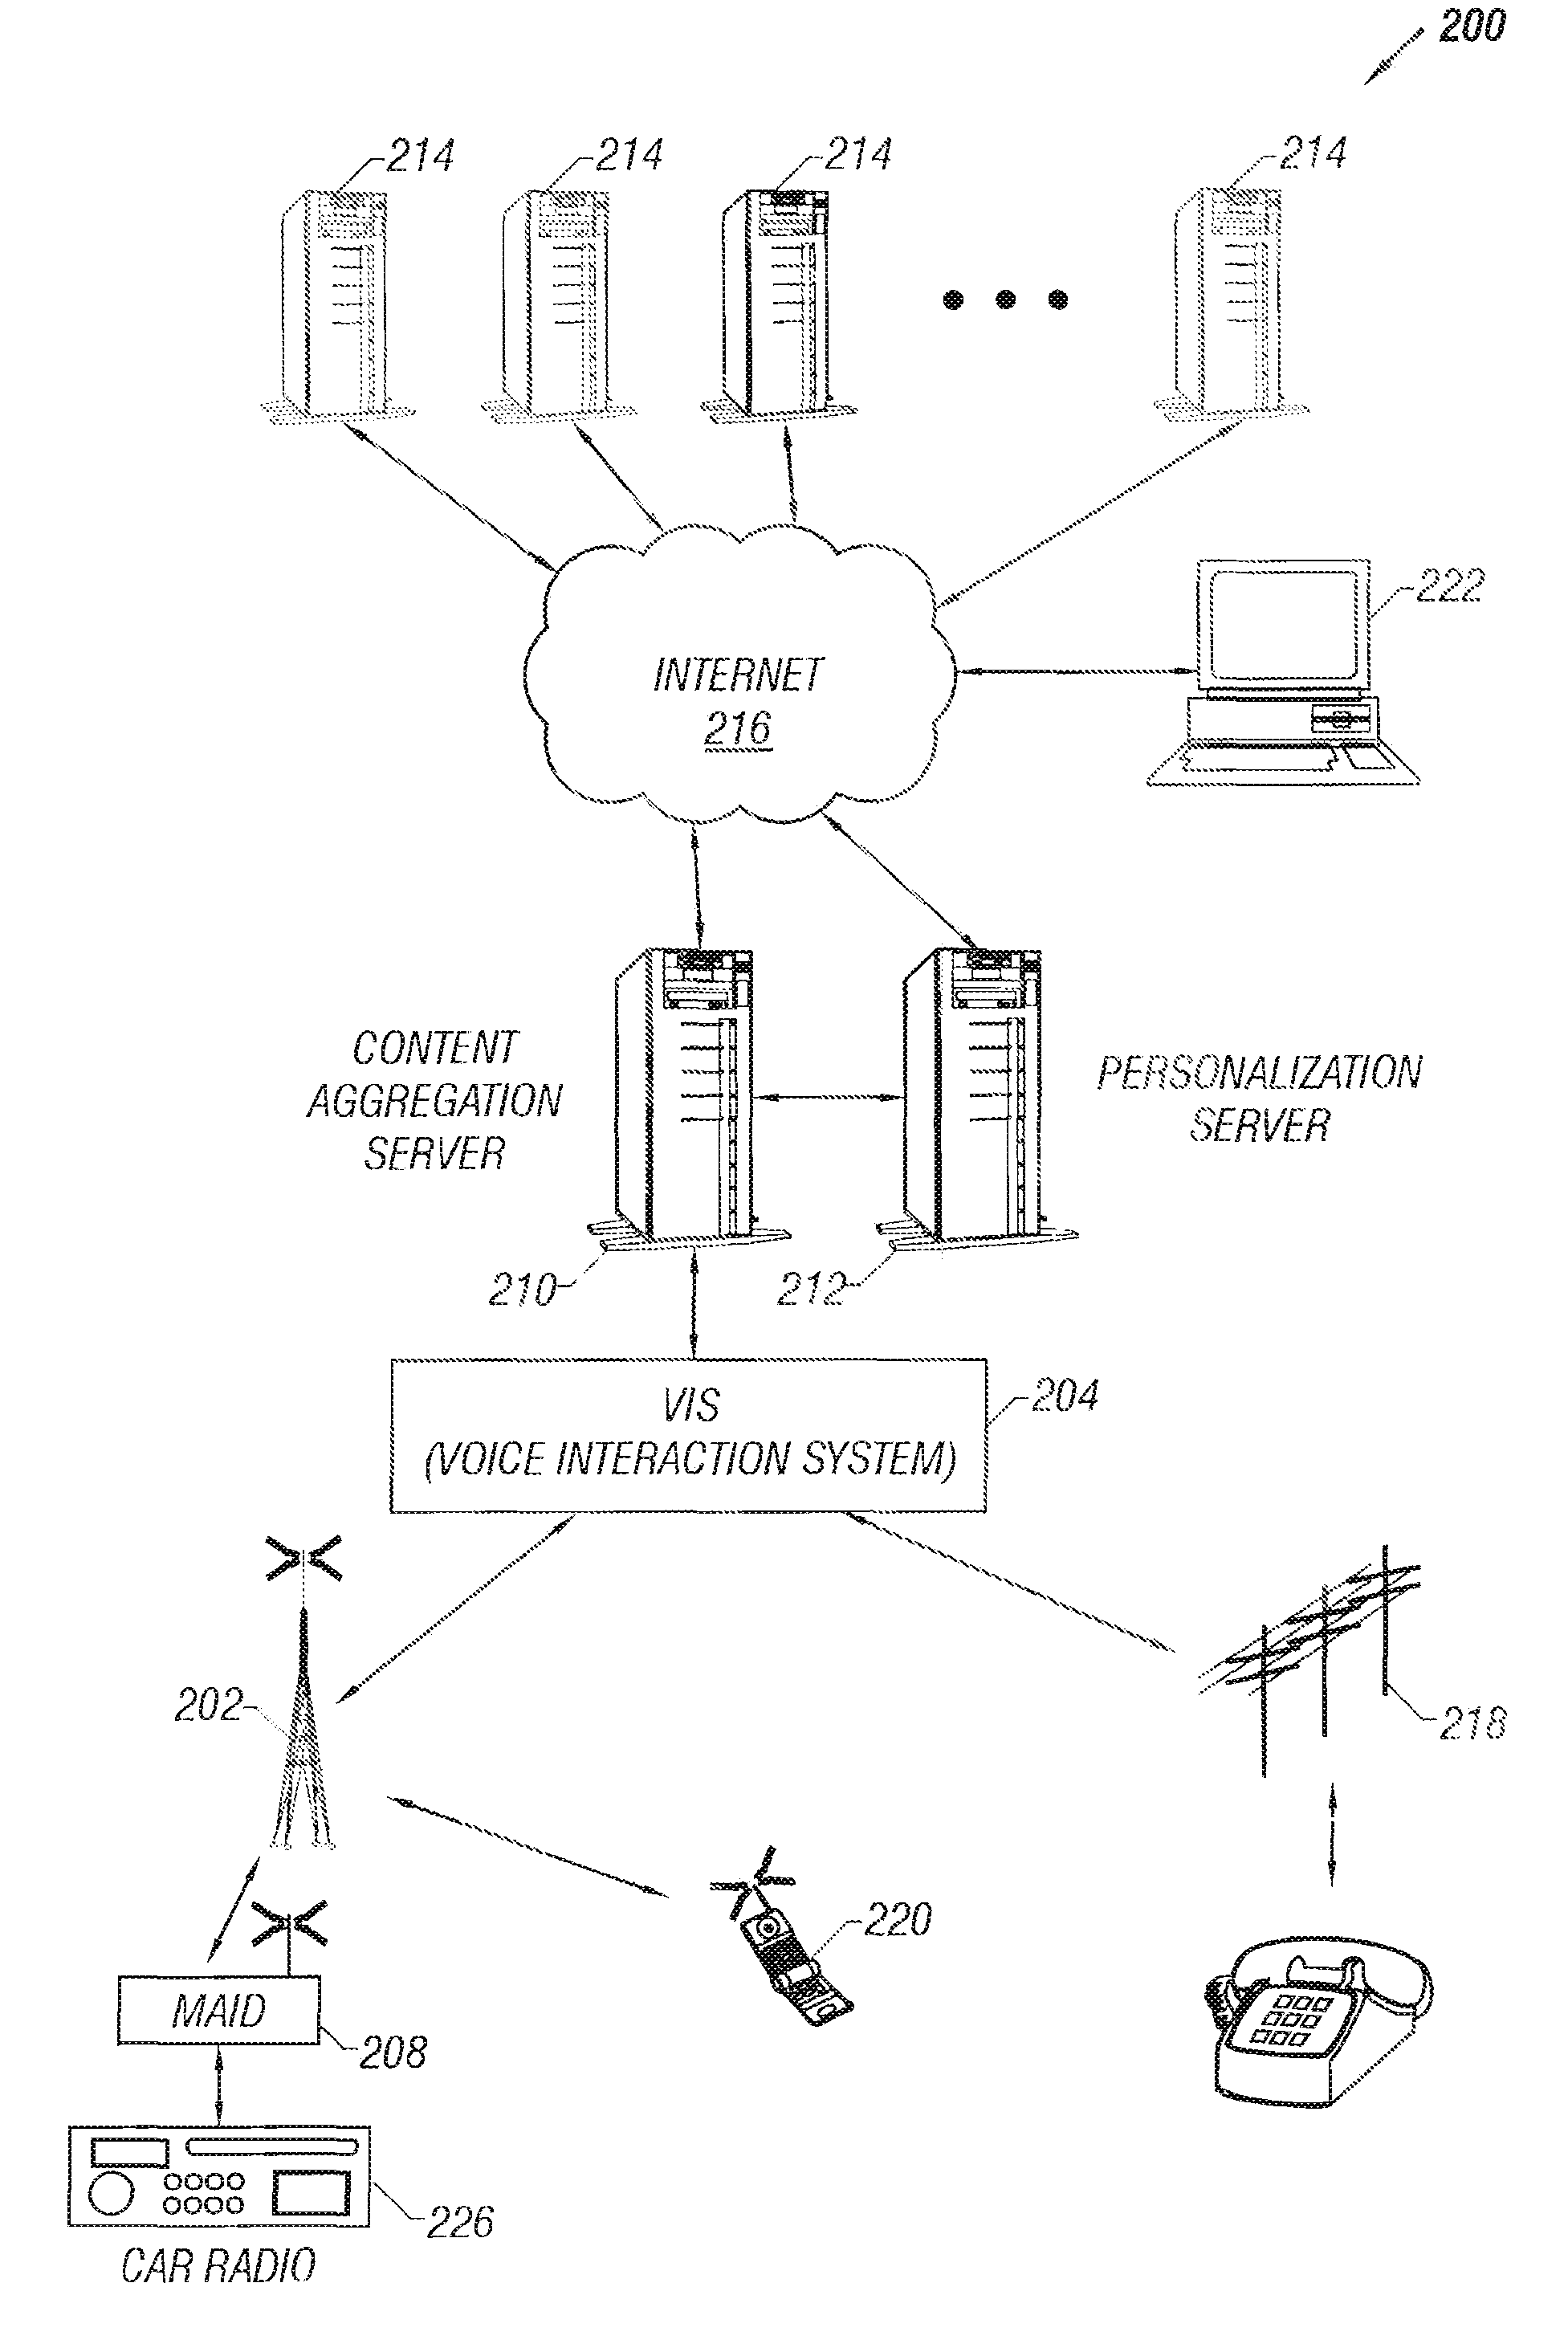 Portable browser device with voice recognition and feedback capability